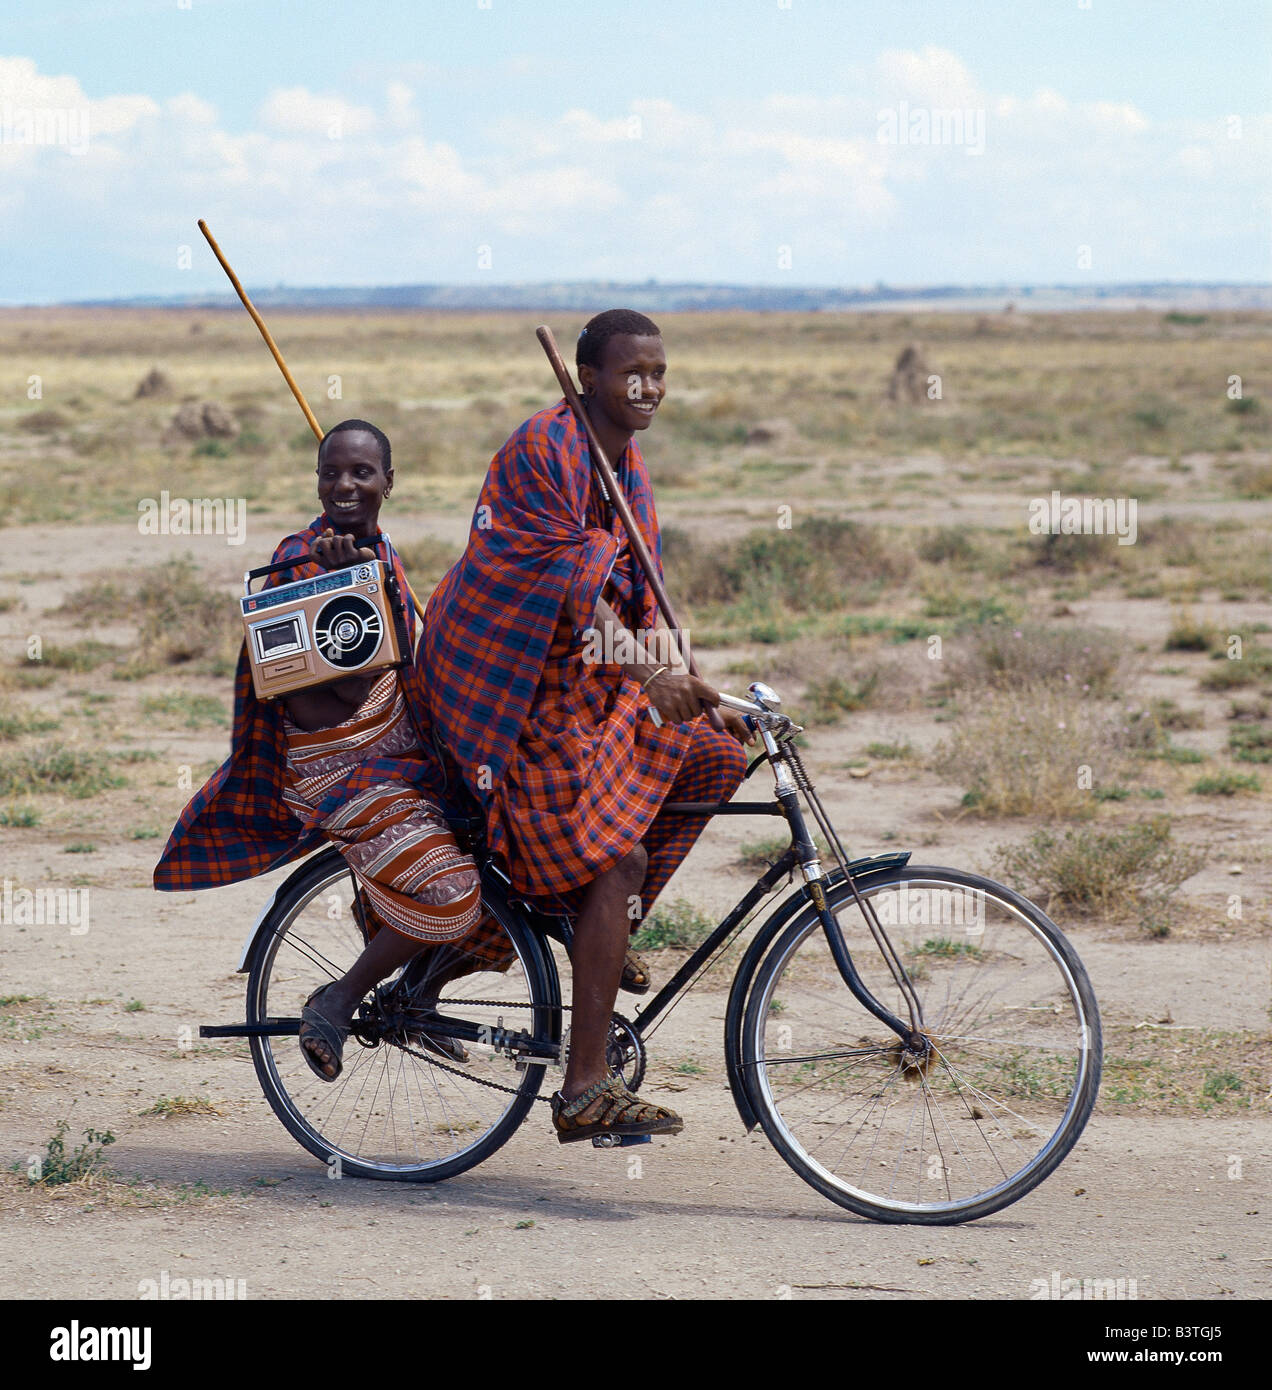 Tanzania, Arusha, Mto wa Mbu. Old and new. Dressed traditionally and carrying familiar wooden staff, two young men give hints that the lifestyle of younger Maasai generations is changing gradually in Tanzania. Stock Photo